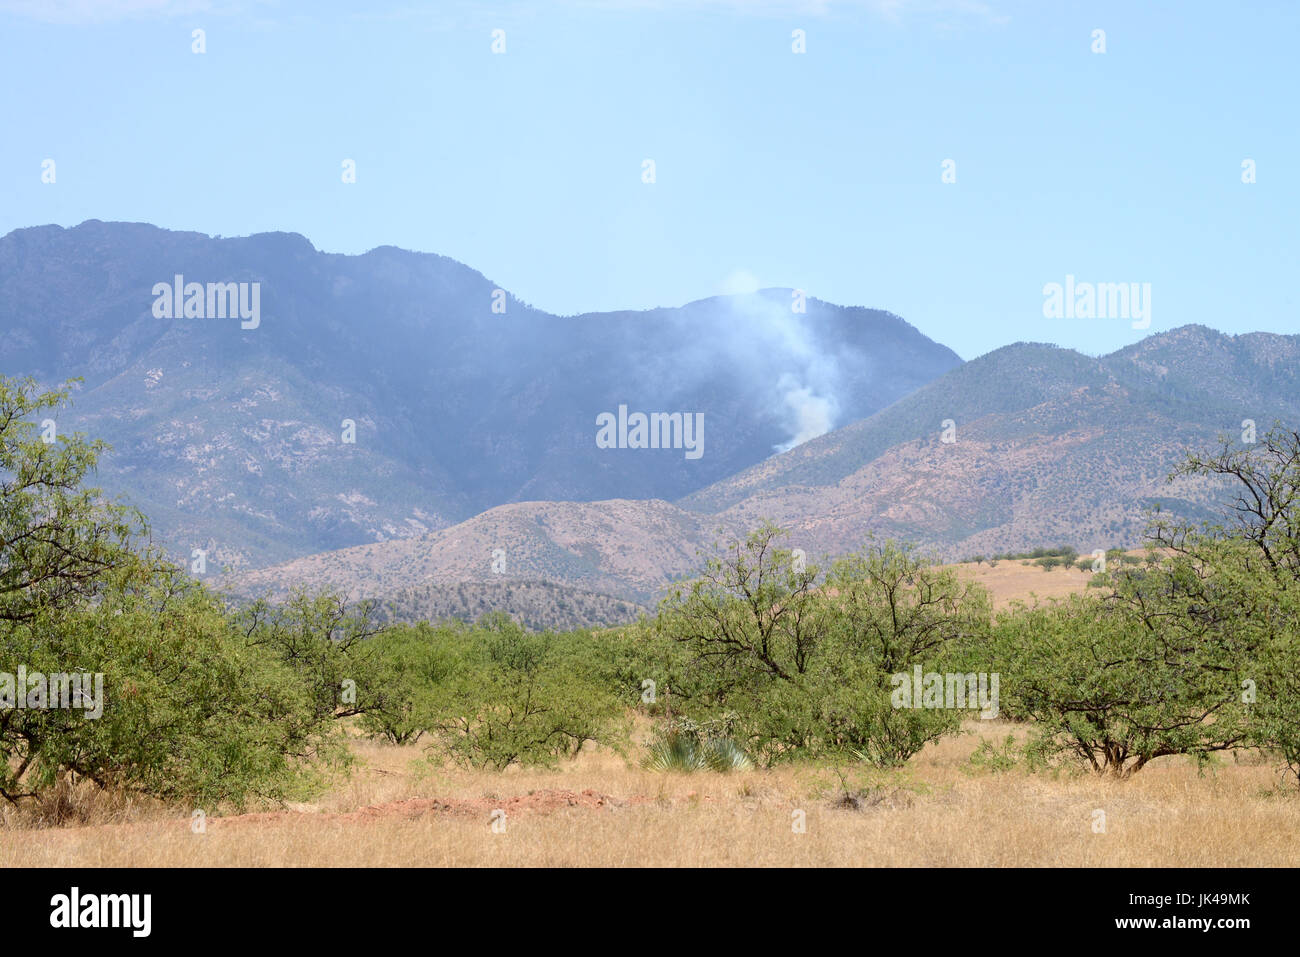 A lightning caused forest fire is monitored in the early stages by Coronado National Forest officials in the Santa Rita Mountains, Arizona, USA. Stock Photo